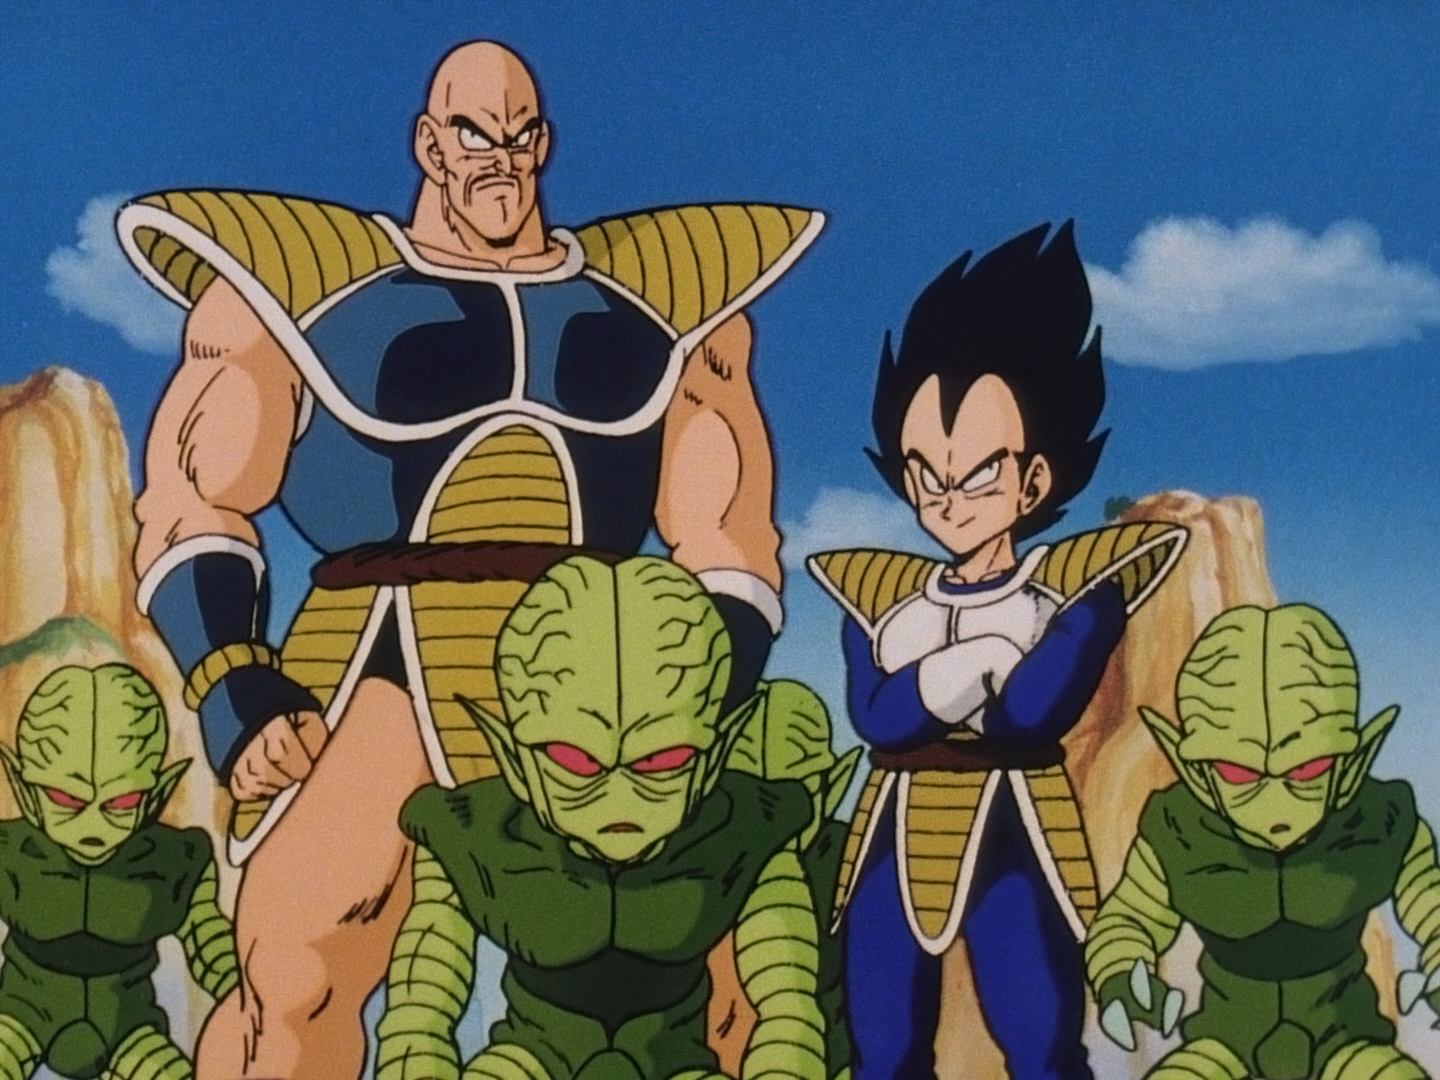 The Battle of the Saiyans